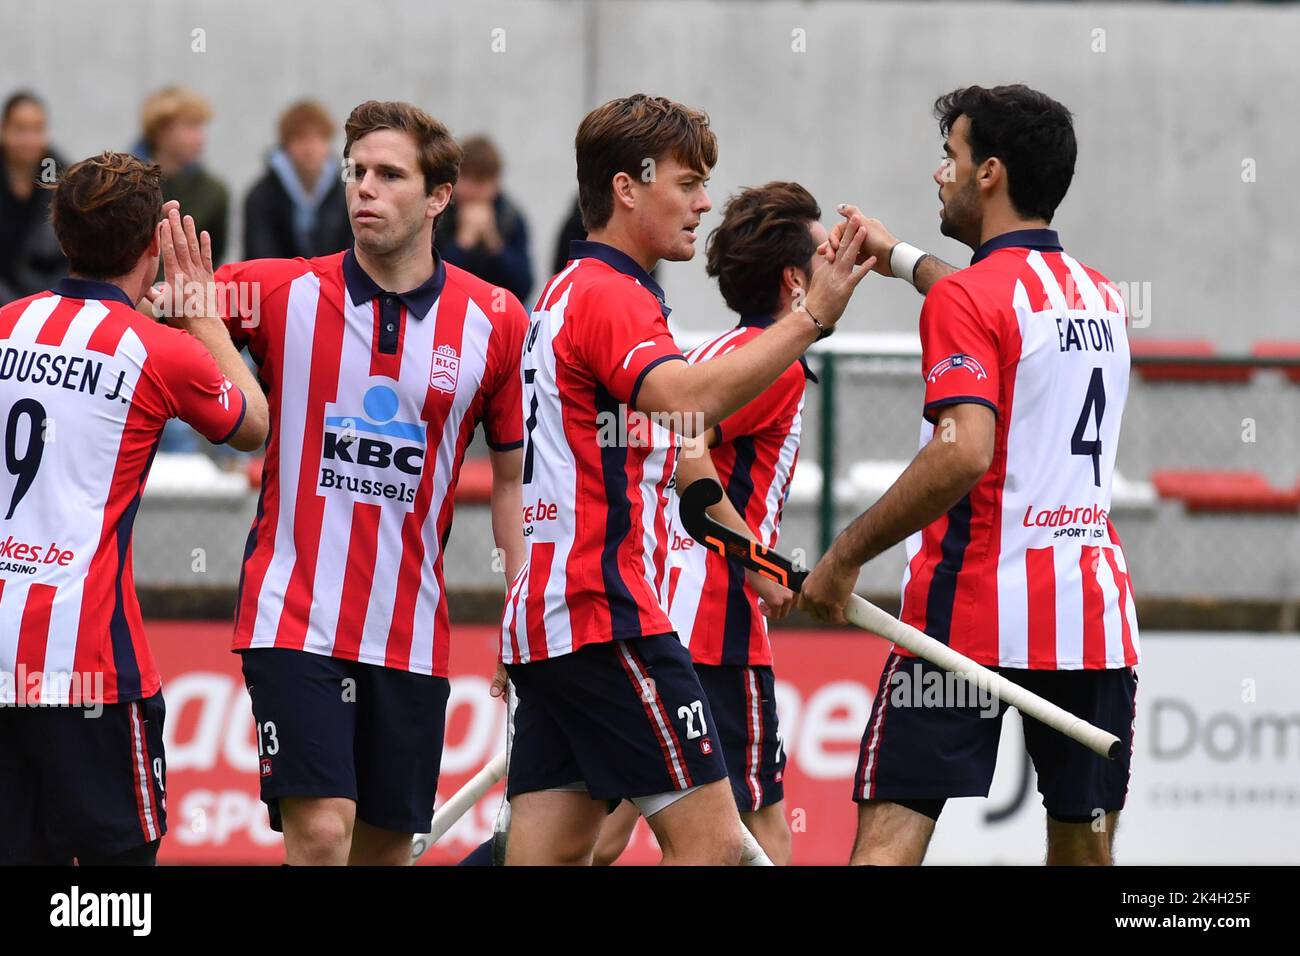 Leopold's players celebrates after scoring during a hockey game between Royal Leopold Club and Royal Oree HC, Sunday 02 October 2022 in Brussels, on day 6 of the Belgian Men Hockey League season 2022-2023. BELGA PHOTO JILL DELSAUX Stock Photo